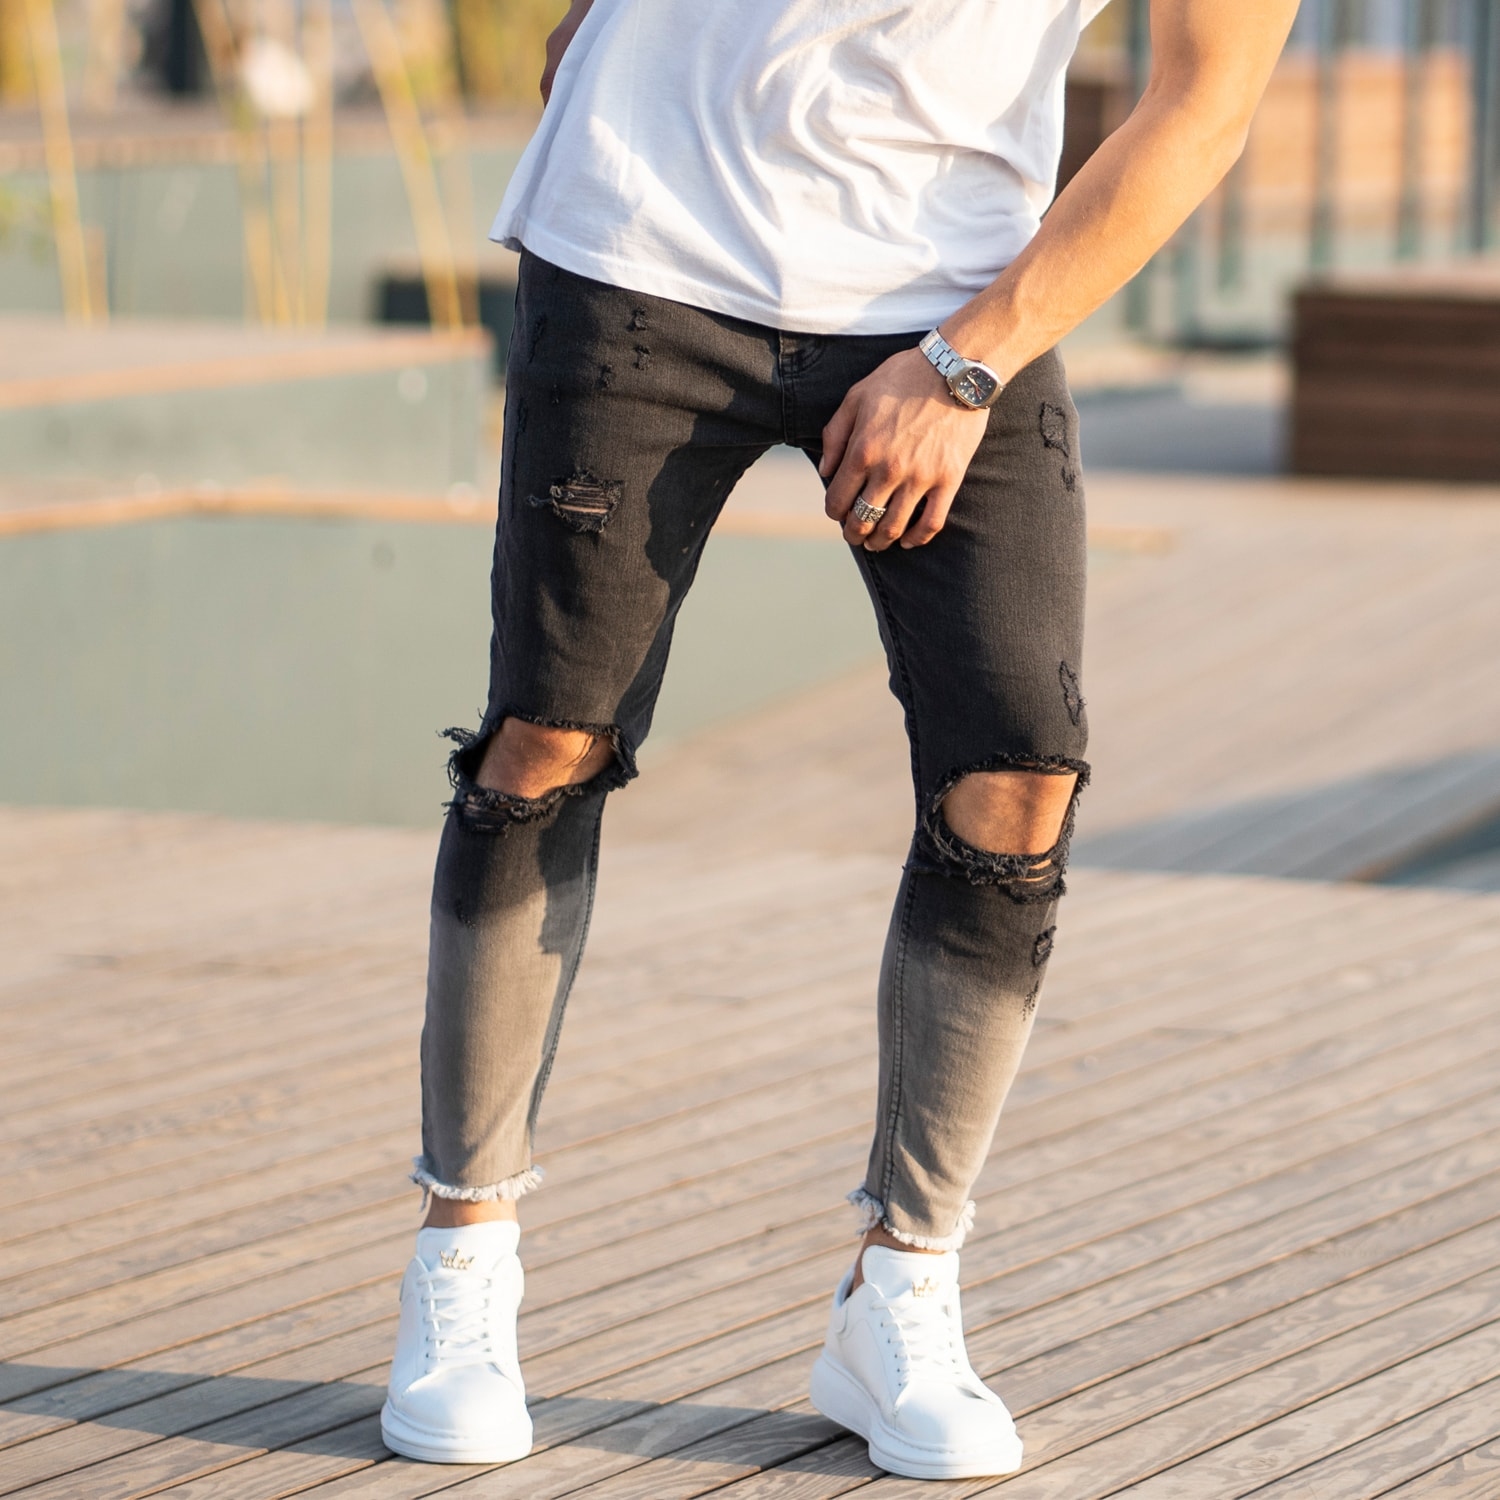 Men's Smoked-Gray Ripped Jeans